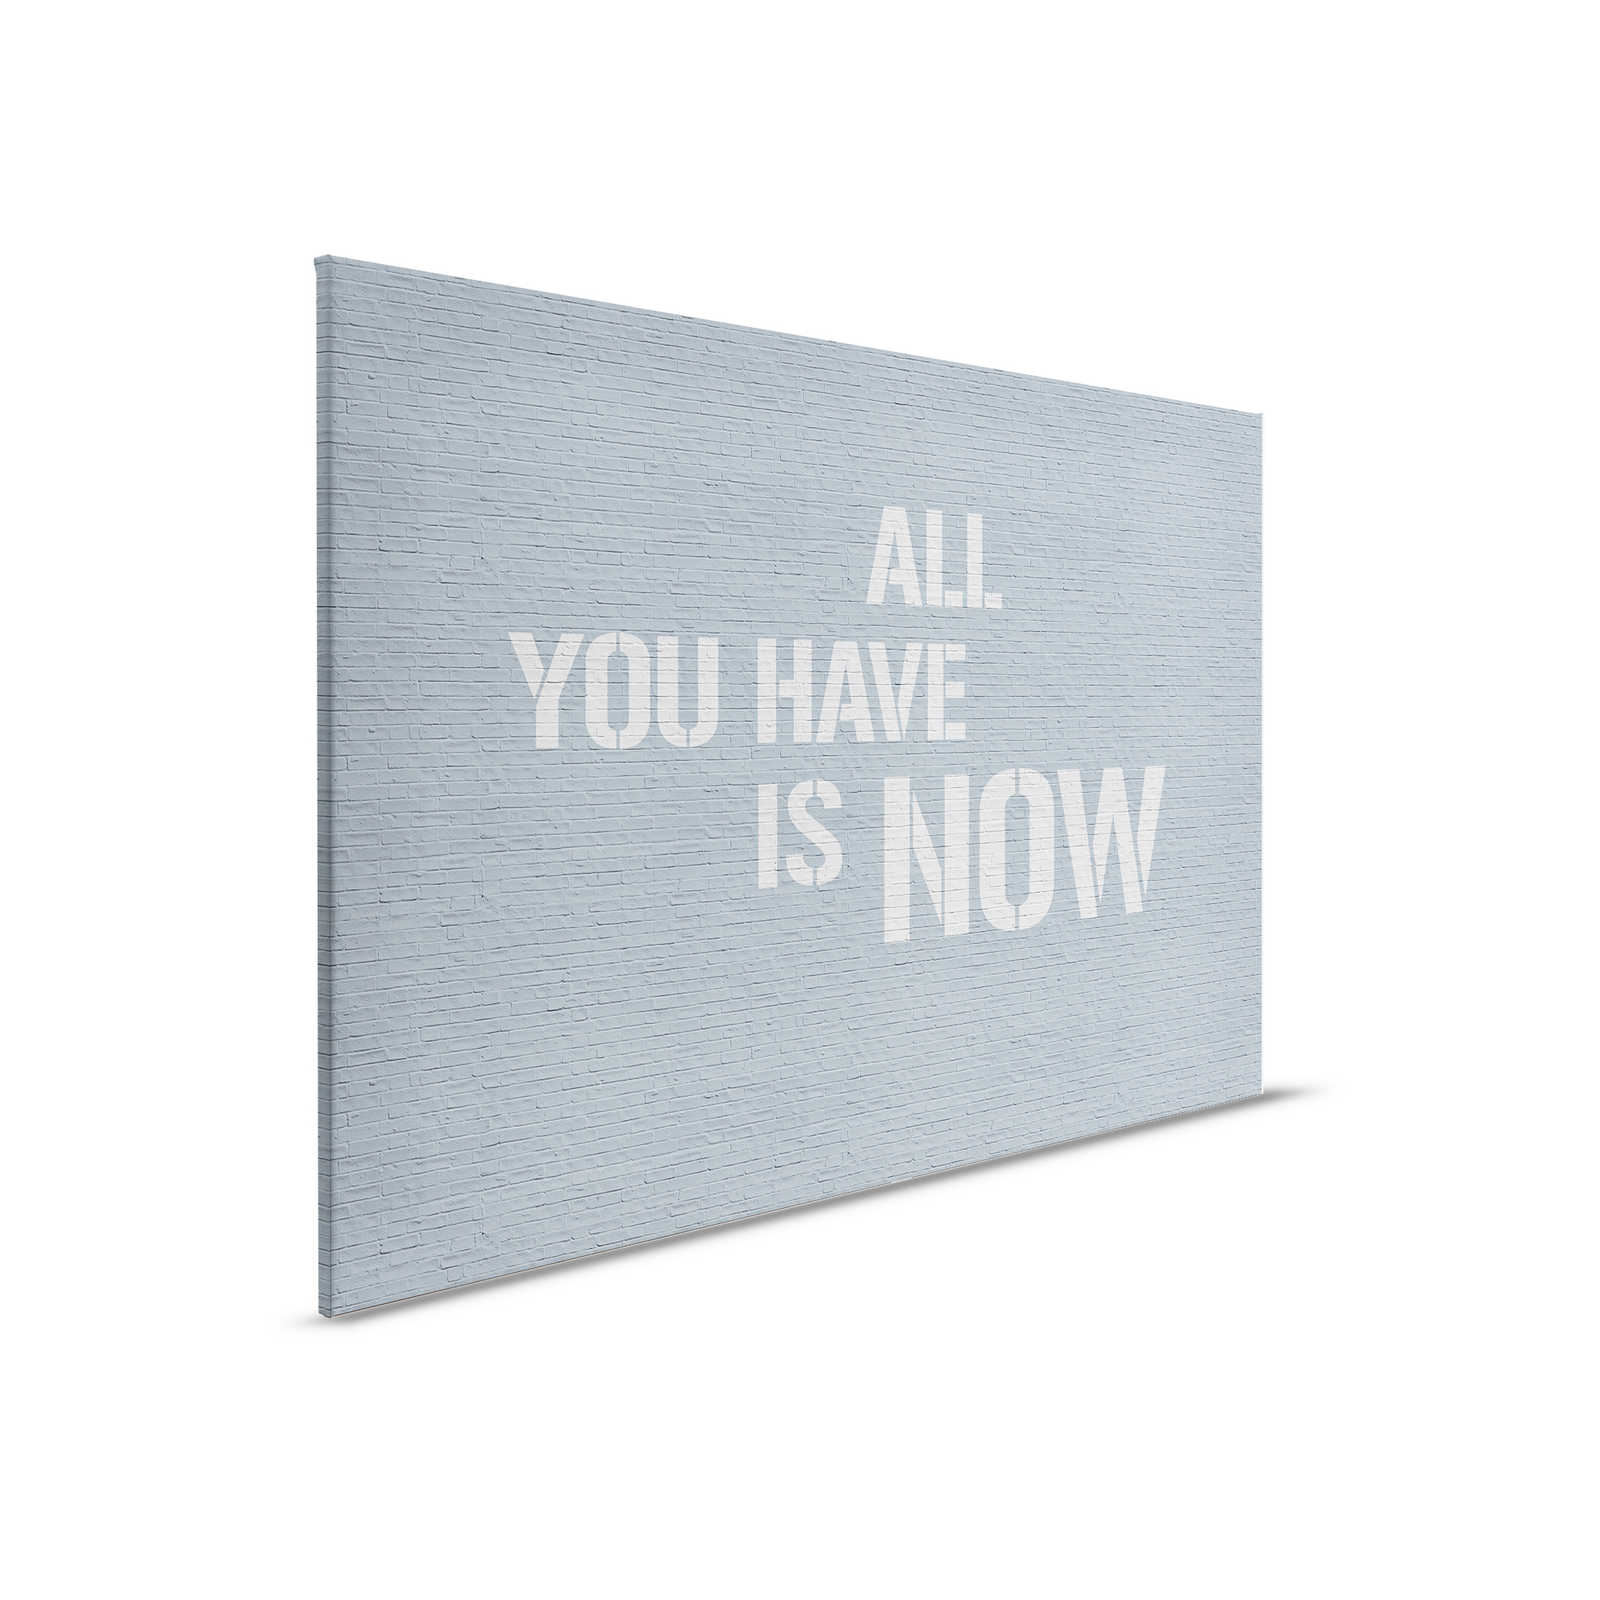         Message 1 - Grey brick wall with saying on canvas picture - 0.90 m x 0.60 m
    